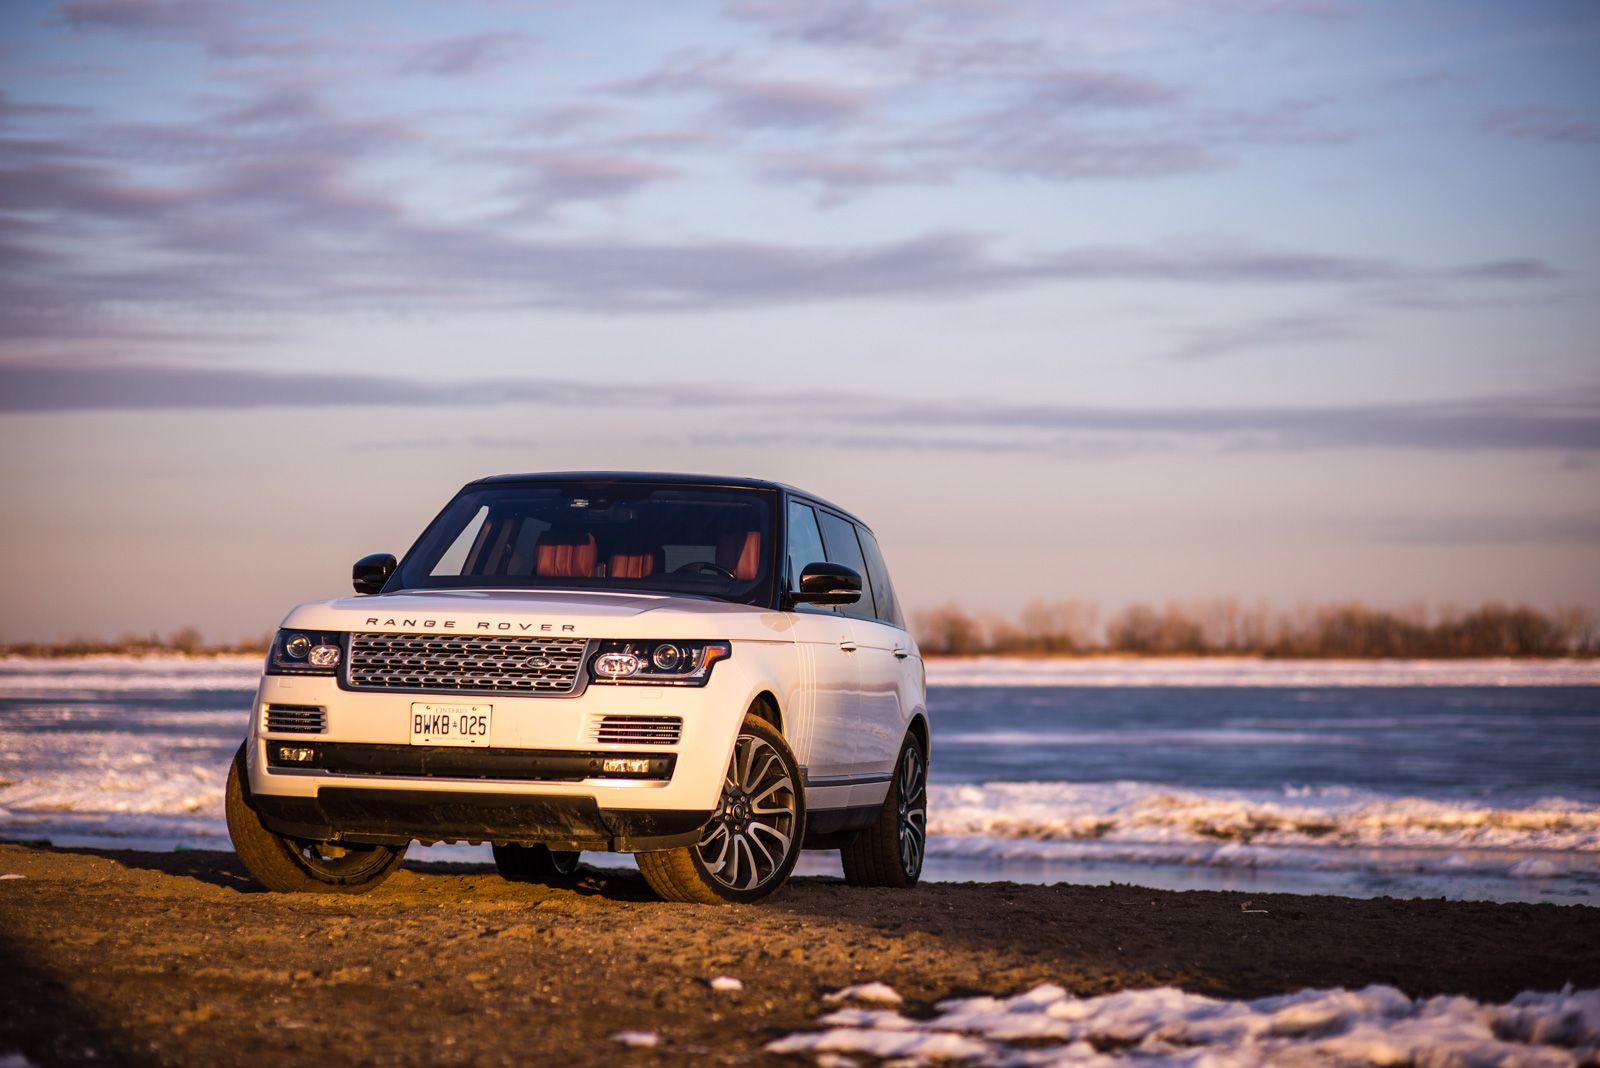 Review: 2015 Range Rover Autobiography LWB. Canadian Auto Review